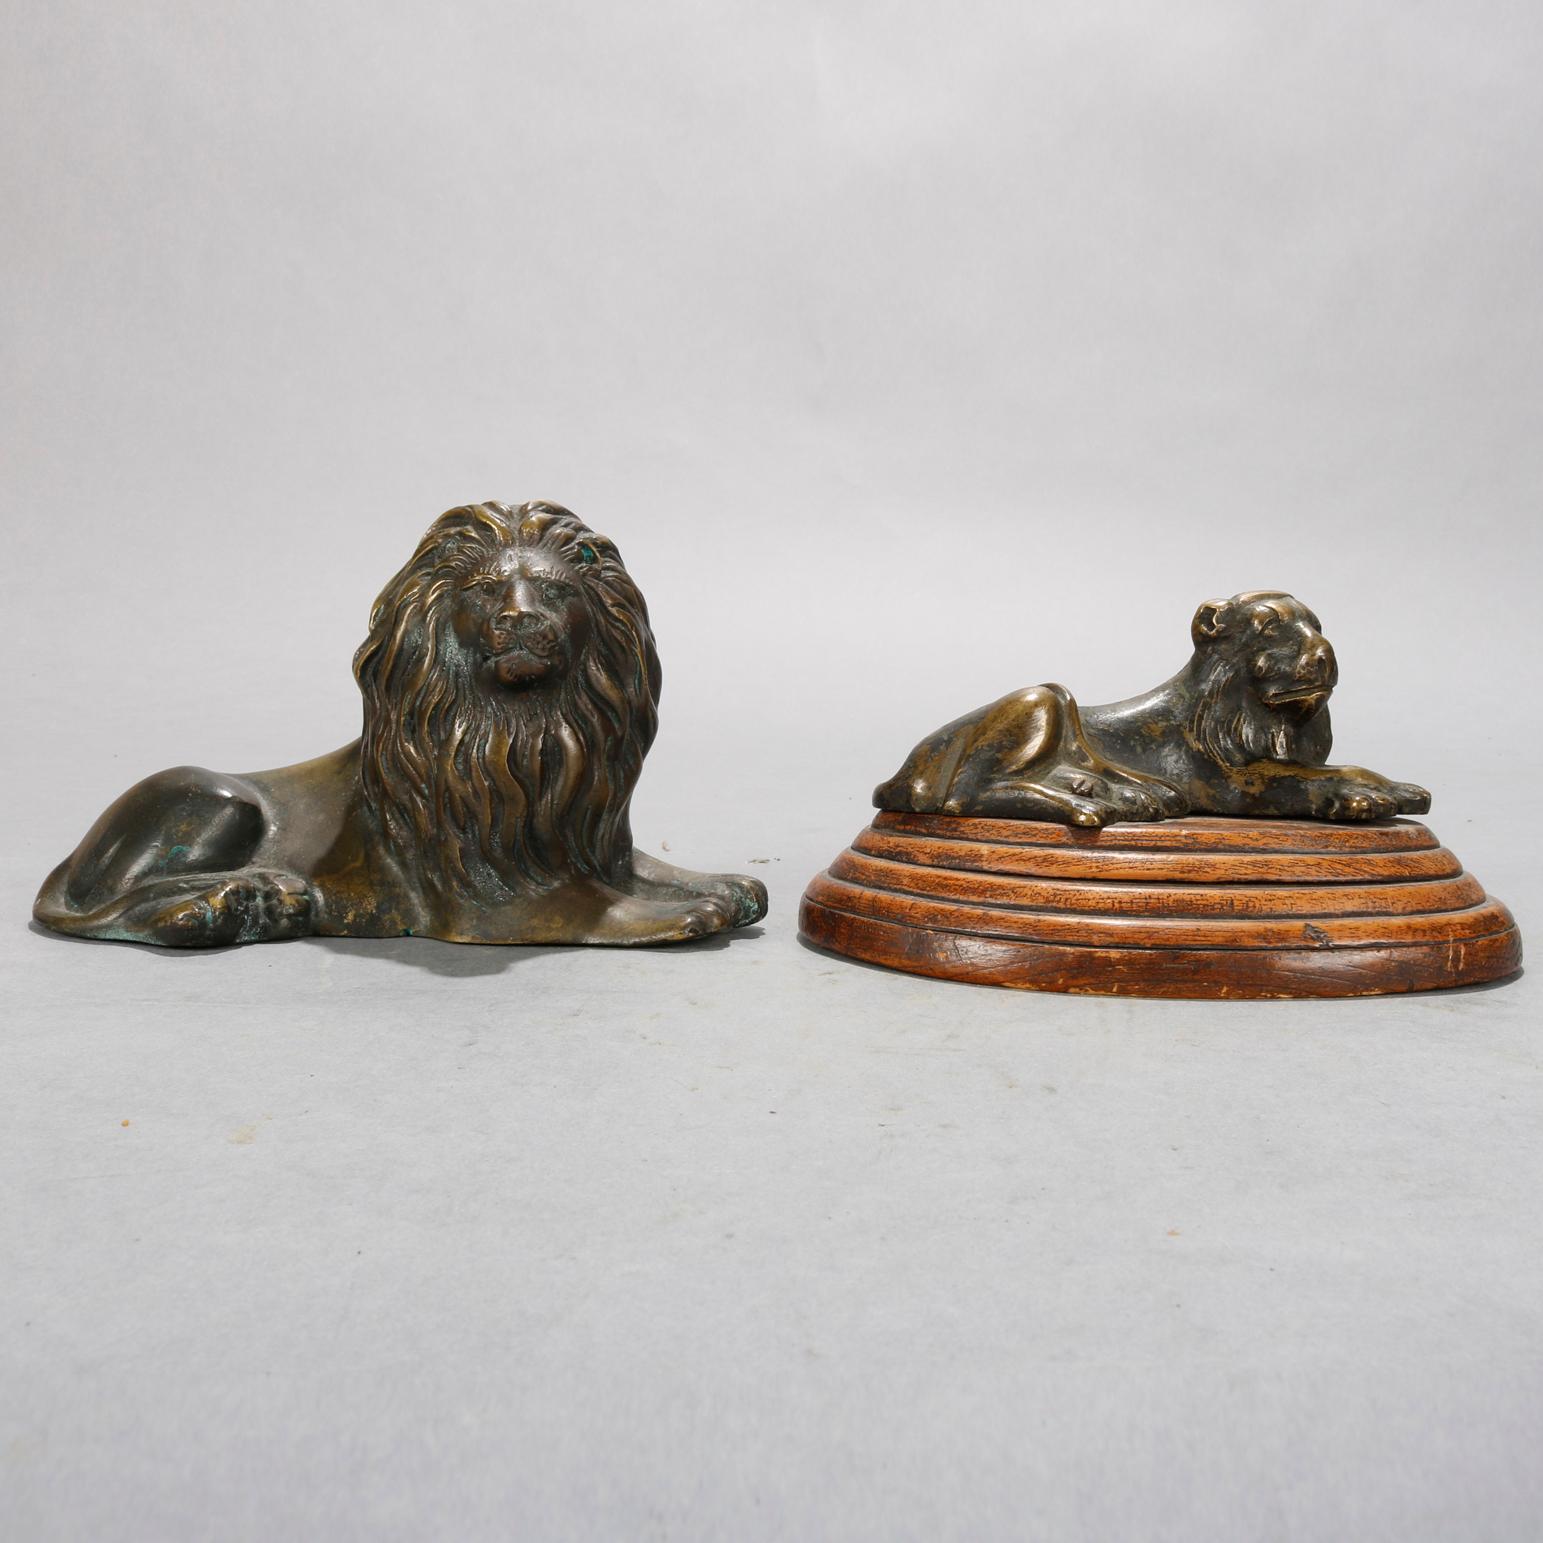 An antique set of French figural sculptures depict recumbent lion and lioness with lioness seated on stepped wood base, circa 1890.

Measures: Male: 4.25